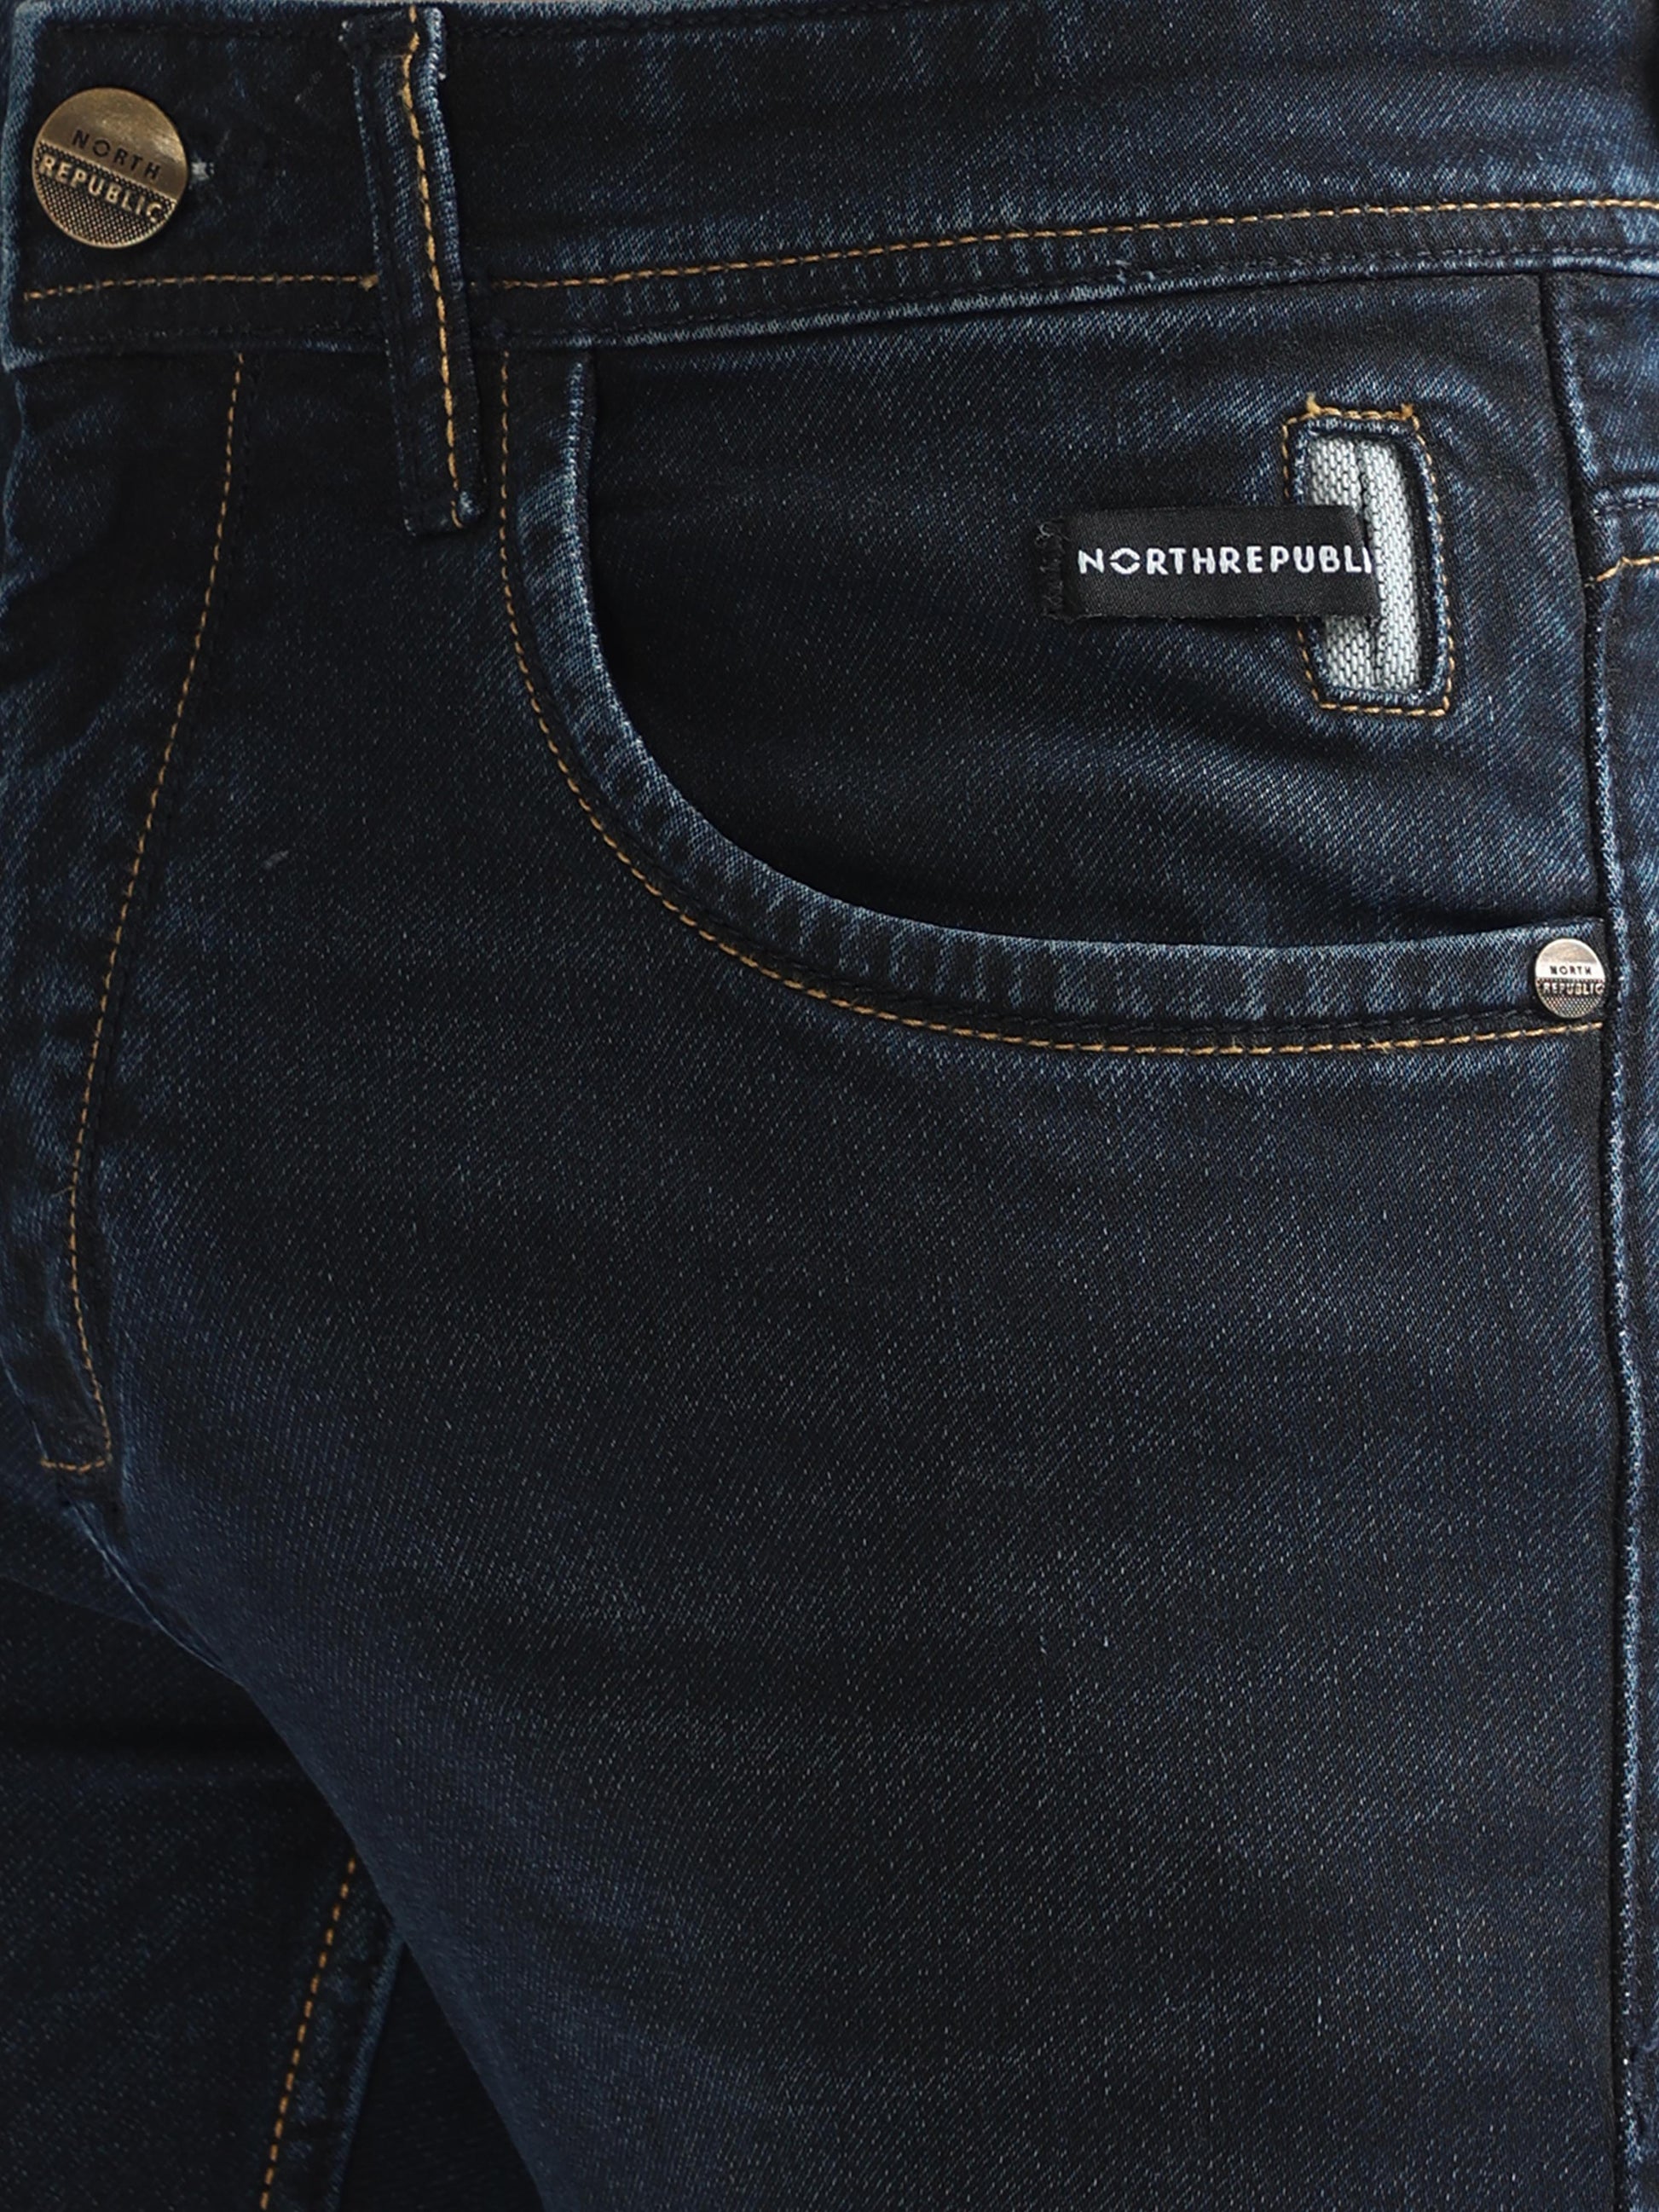 Buy Contrast Thread Twill Jeans Online.